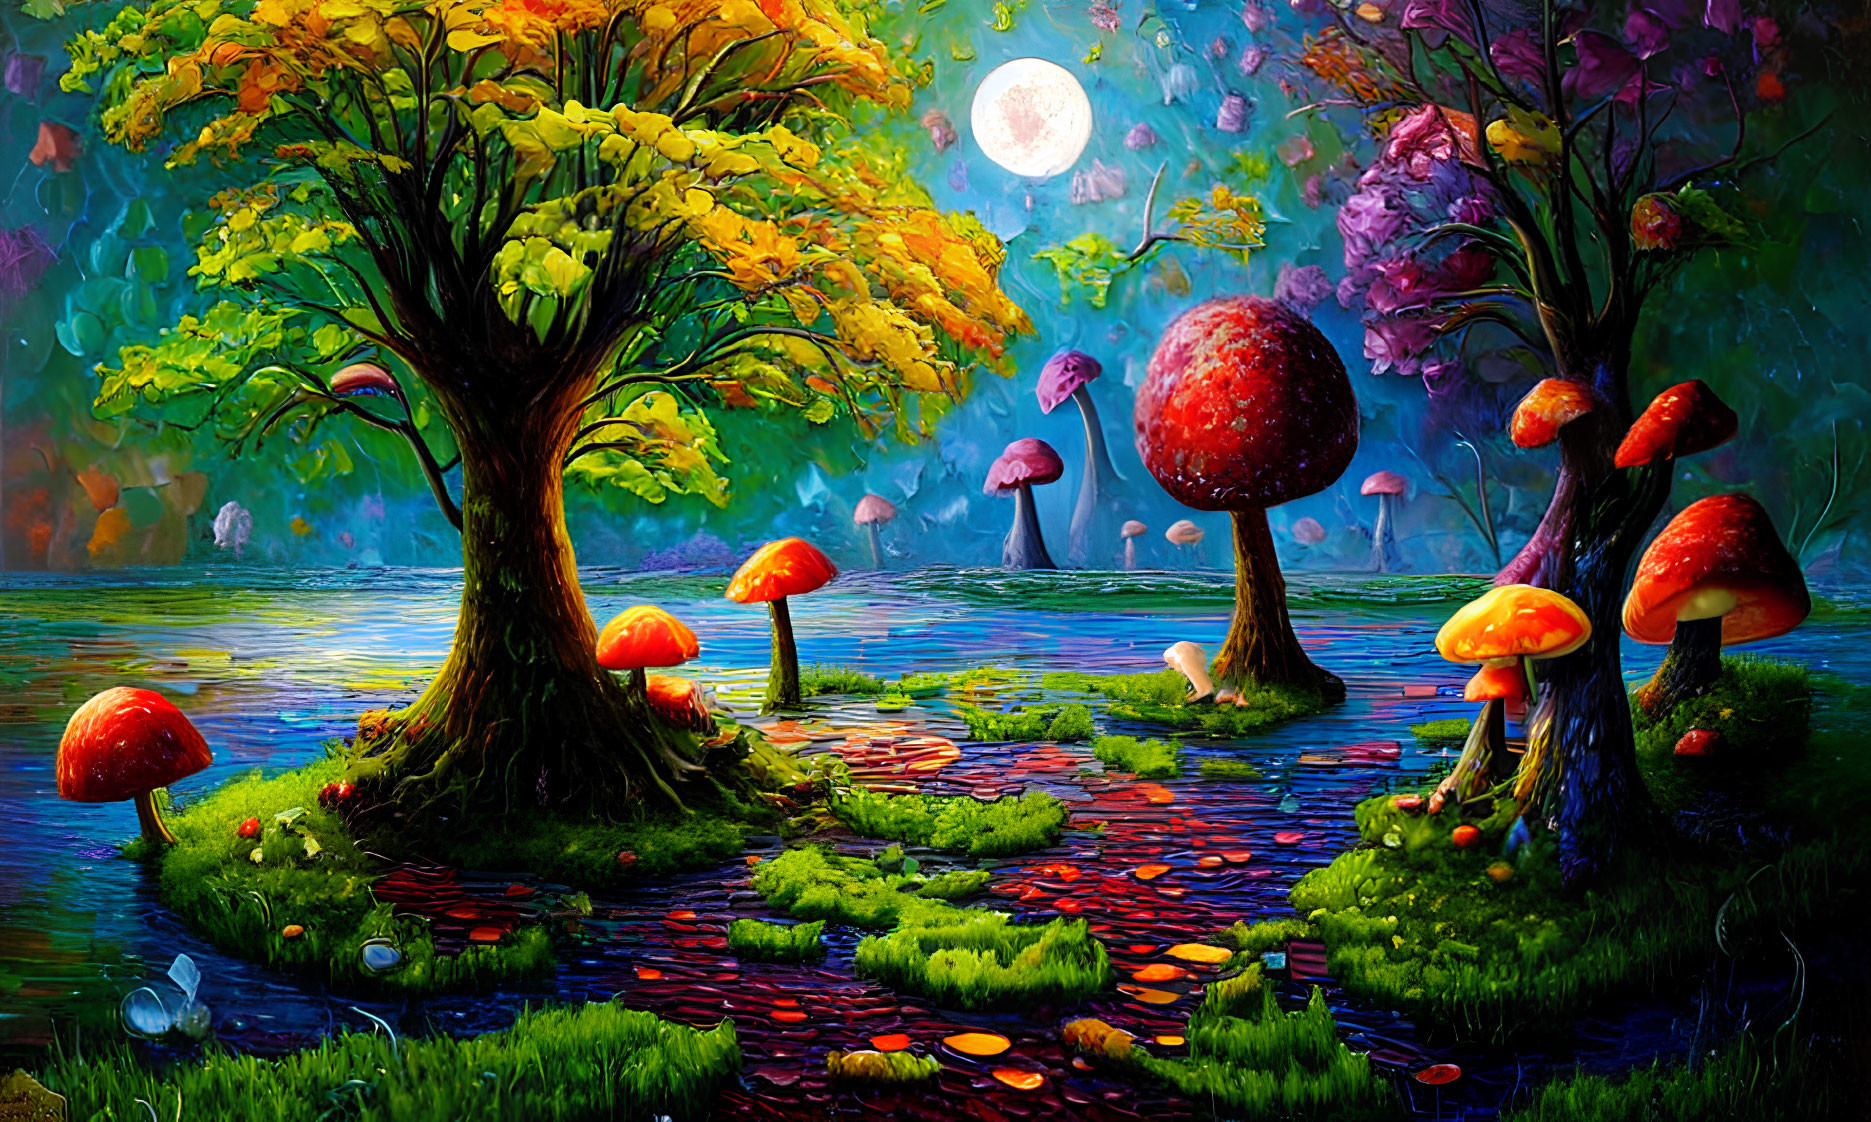 Colorful Trees and Oversized Mushrooms in Moonlit Fantasy Landscape